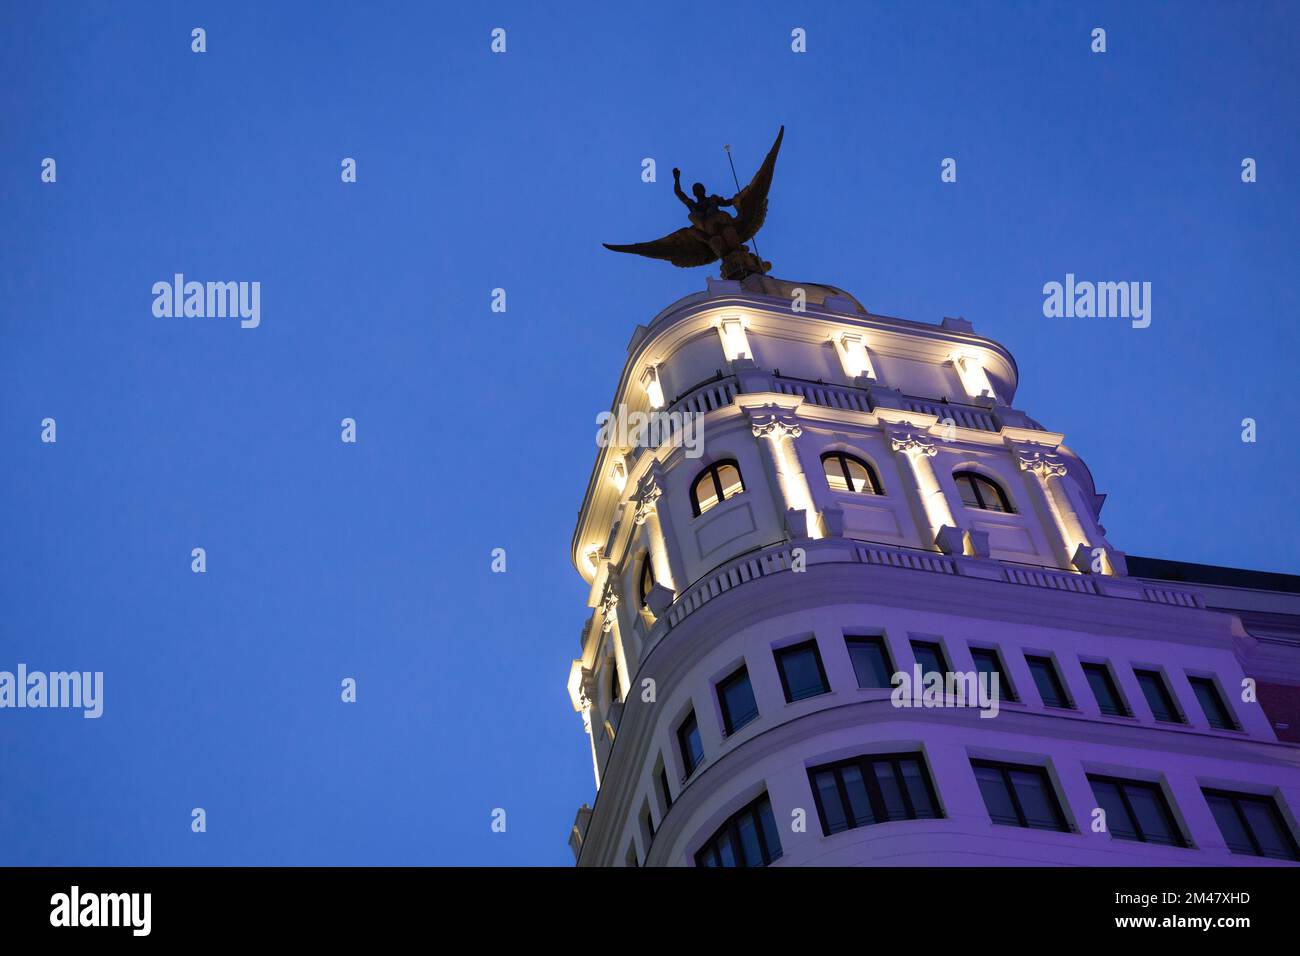 Night view of the tower of a building topped with a sculpture of a Phoenix bird. City of Madrid, Spain. Space for text. Stock Photo